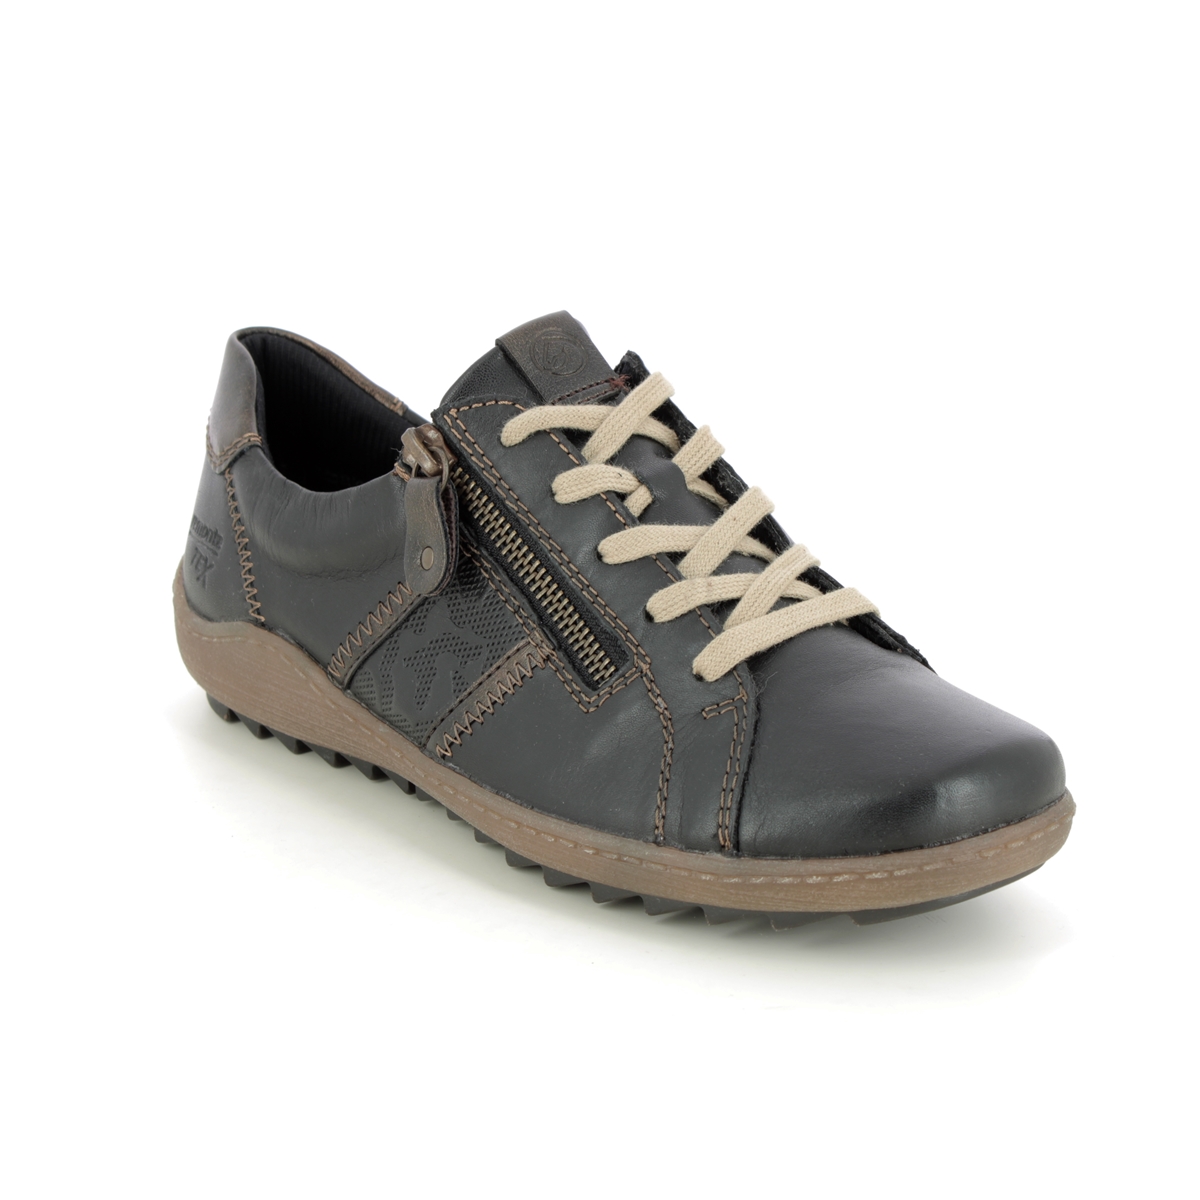 Remonte Zigspo Tex 15 Black Leather Womens Lacing Shoes R1426-02 In Size 43 In Plain Black Leather